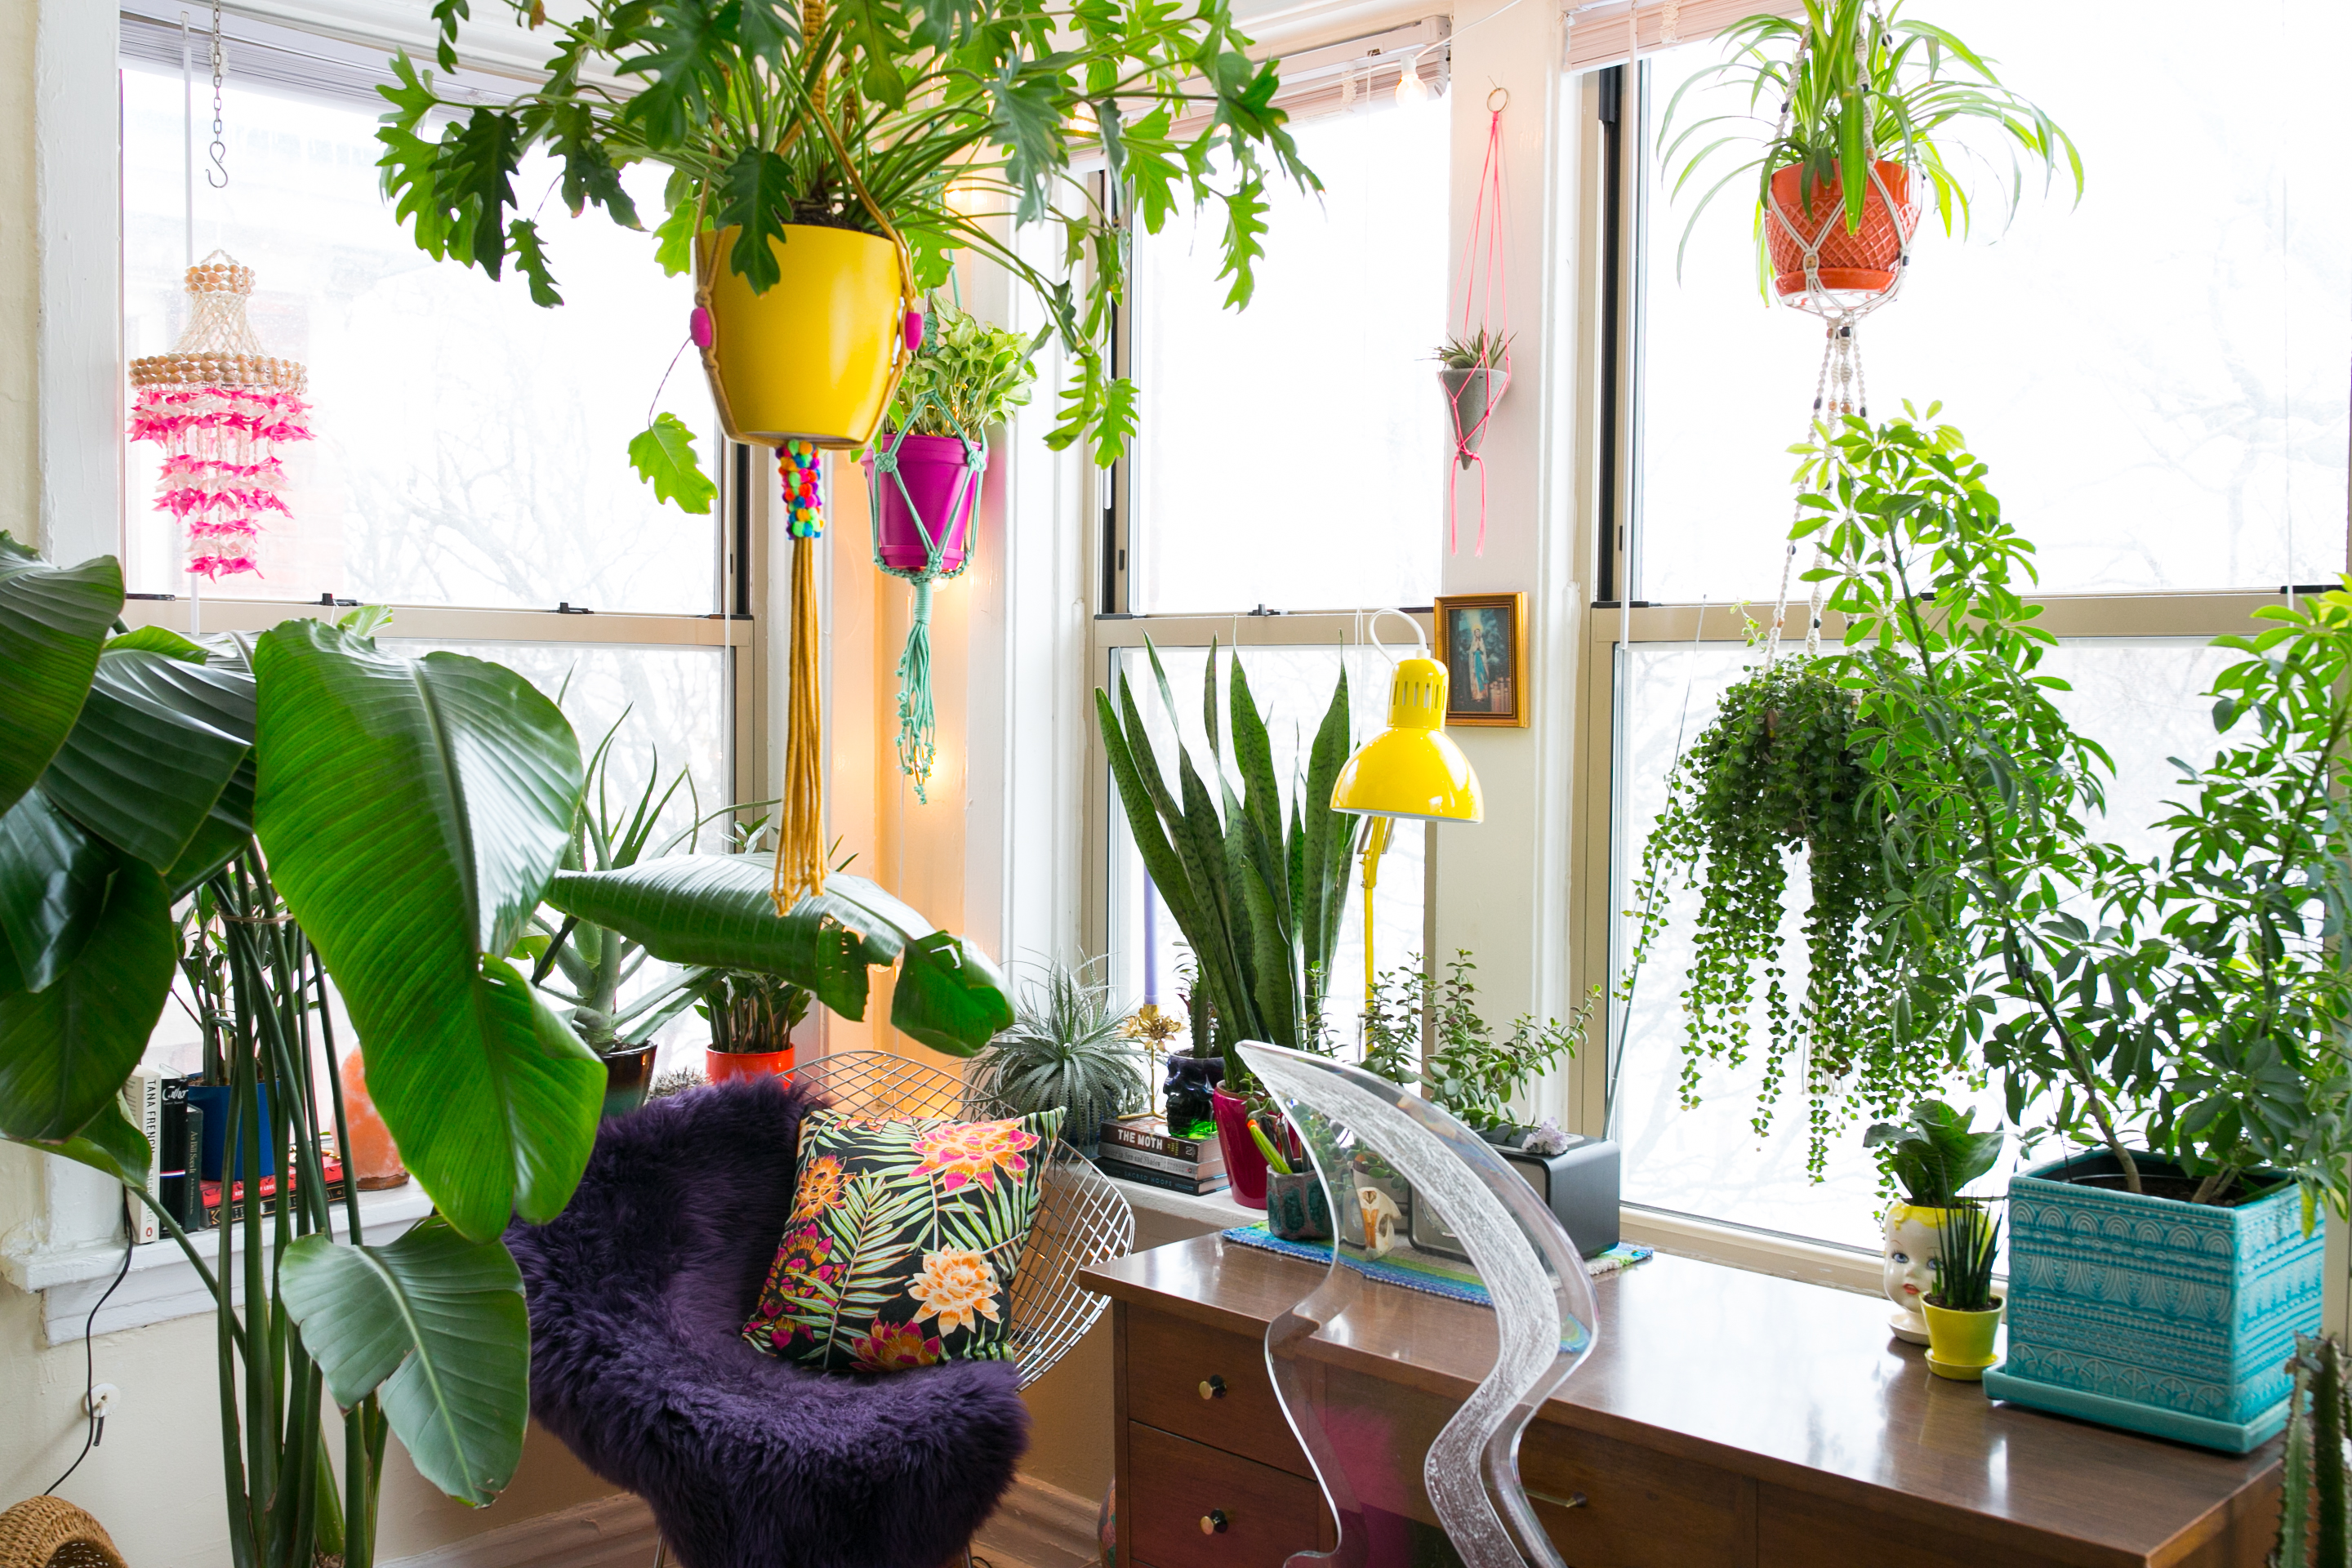 IKEA Hacks for Plants - Plant Stands, Terrariums | Apartment Therapy